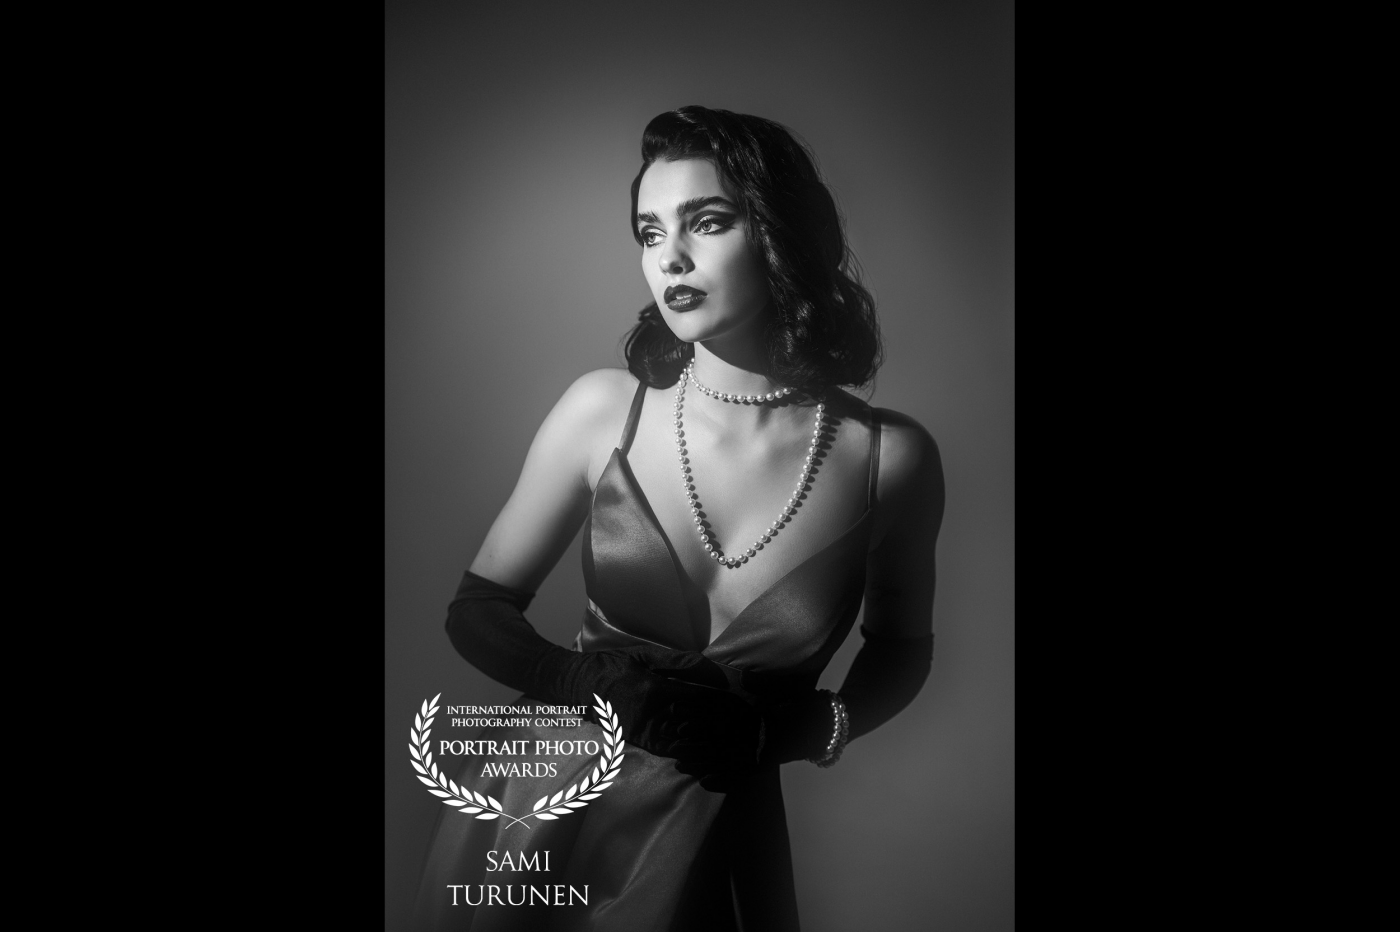 Film noir theme and Hollywood light. Shot with a hard bare bulb light and used soft focus filter to create glow & bloom. Model is amazing Oona Antila and our talented stylist Nina Vuori.